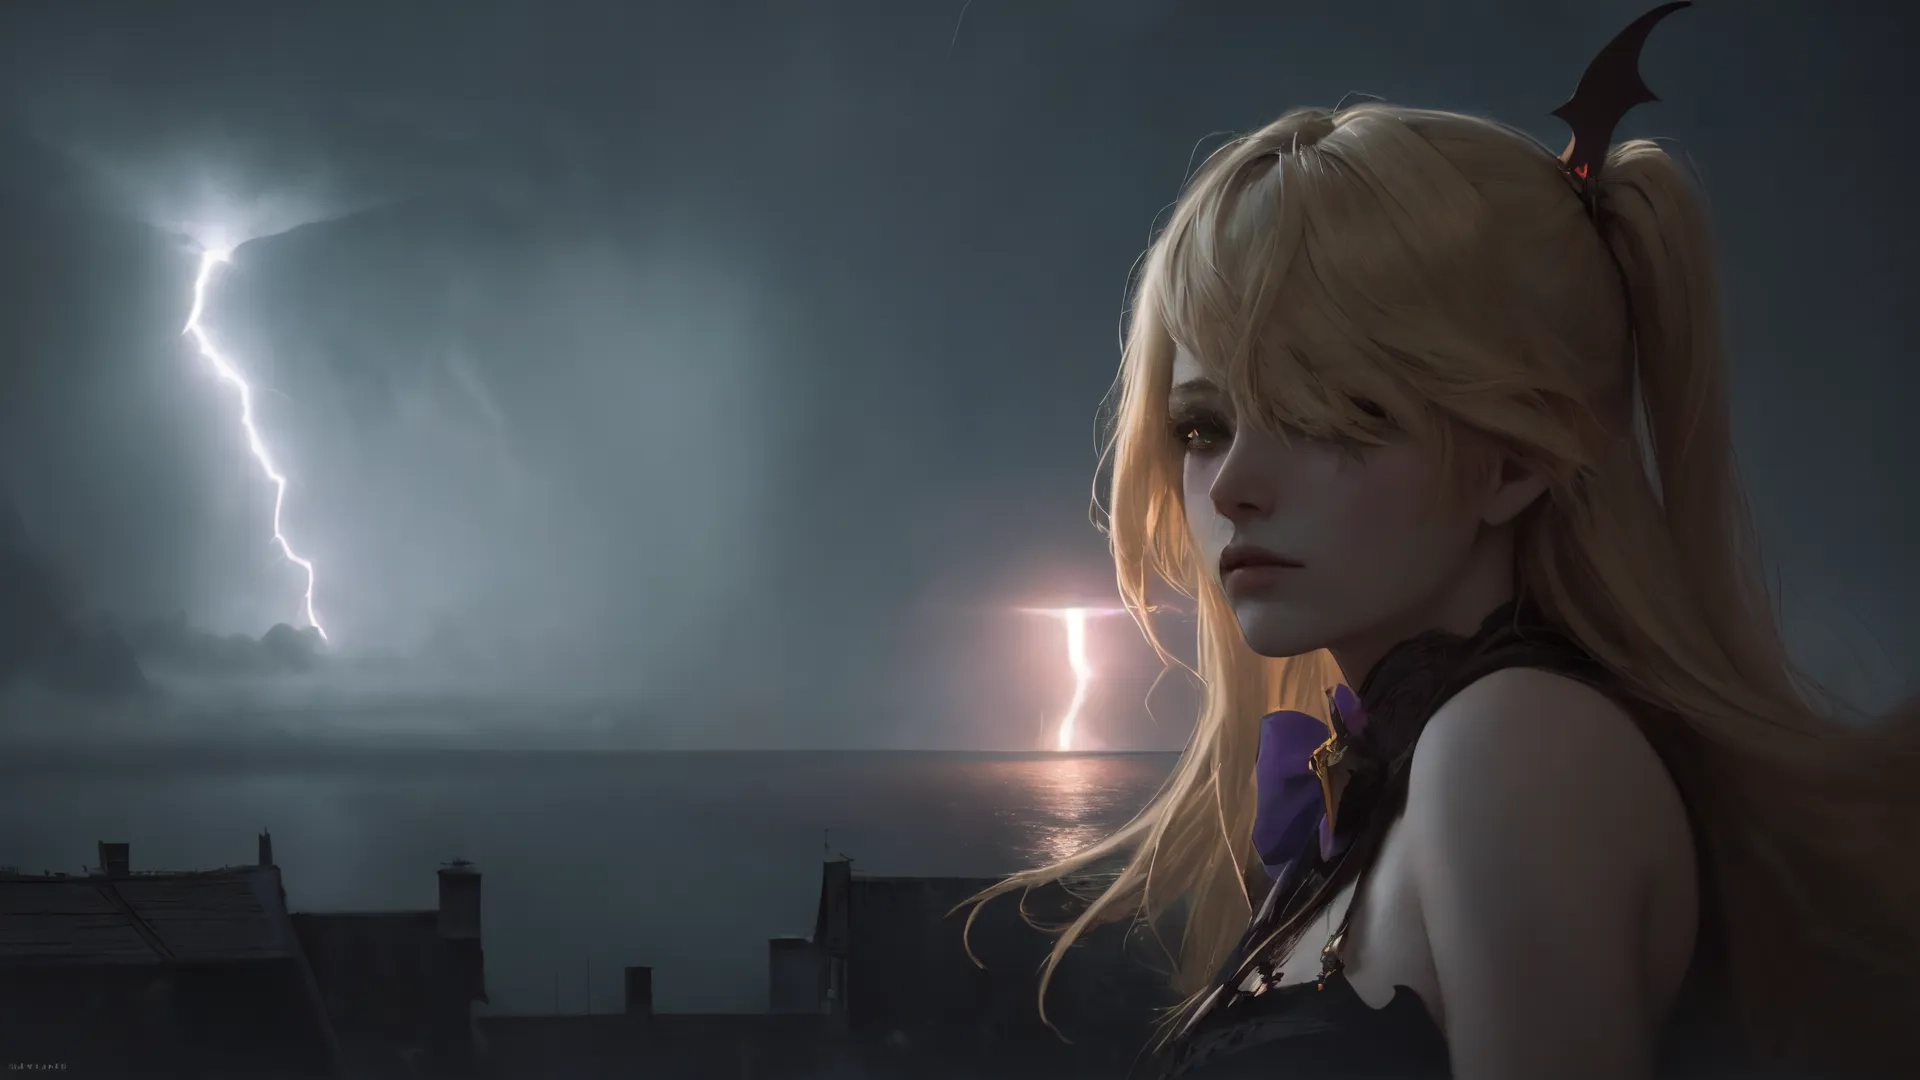 a girl near a lake with lightening behind her in a thunder storm storming sky and buildings above her in the background has clouds, lightning and bolts
